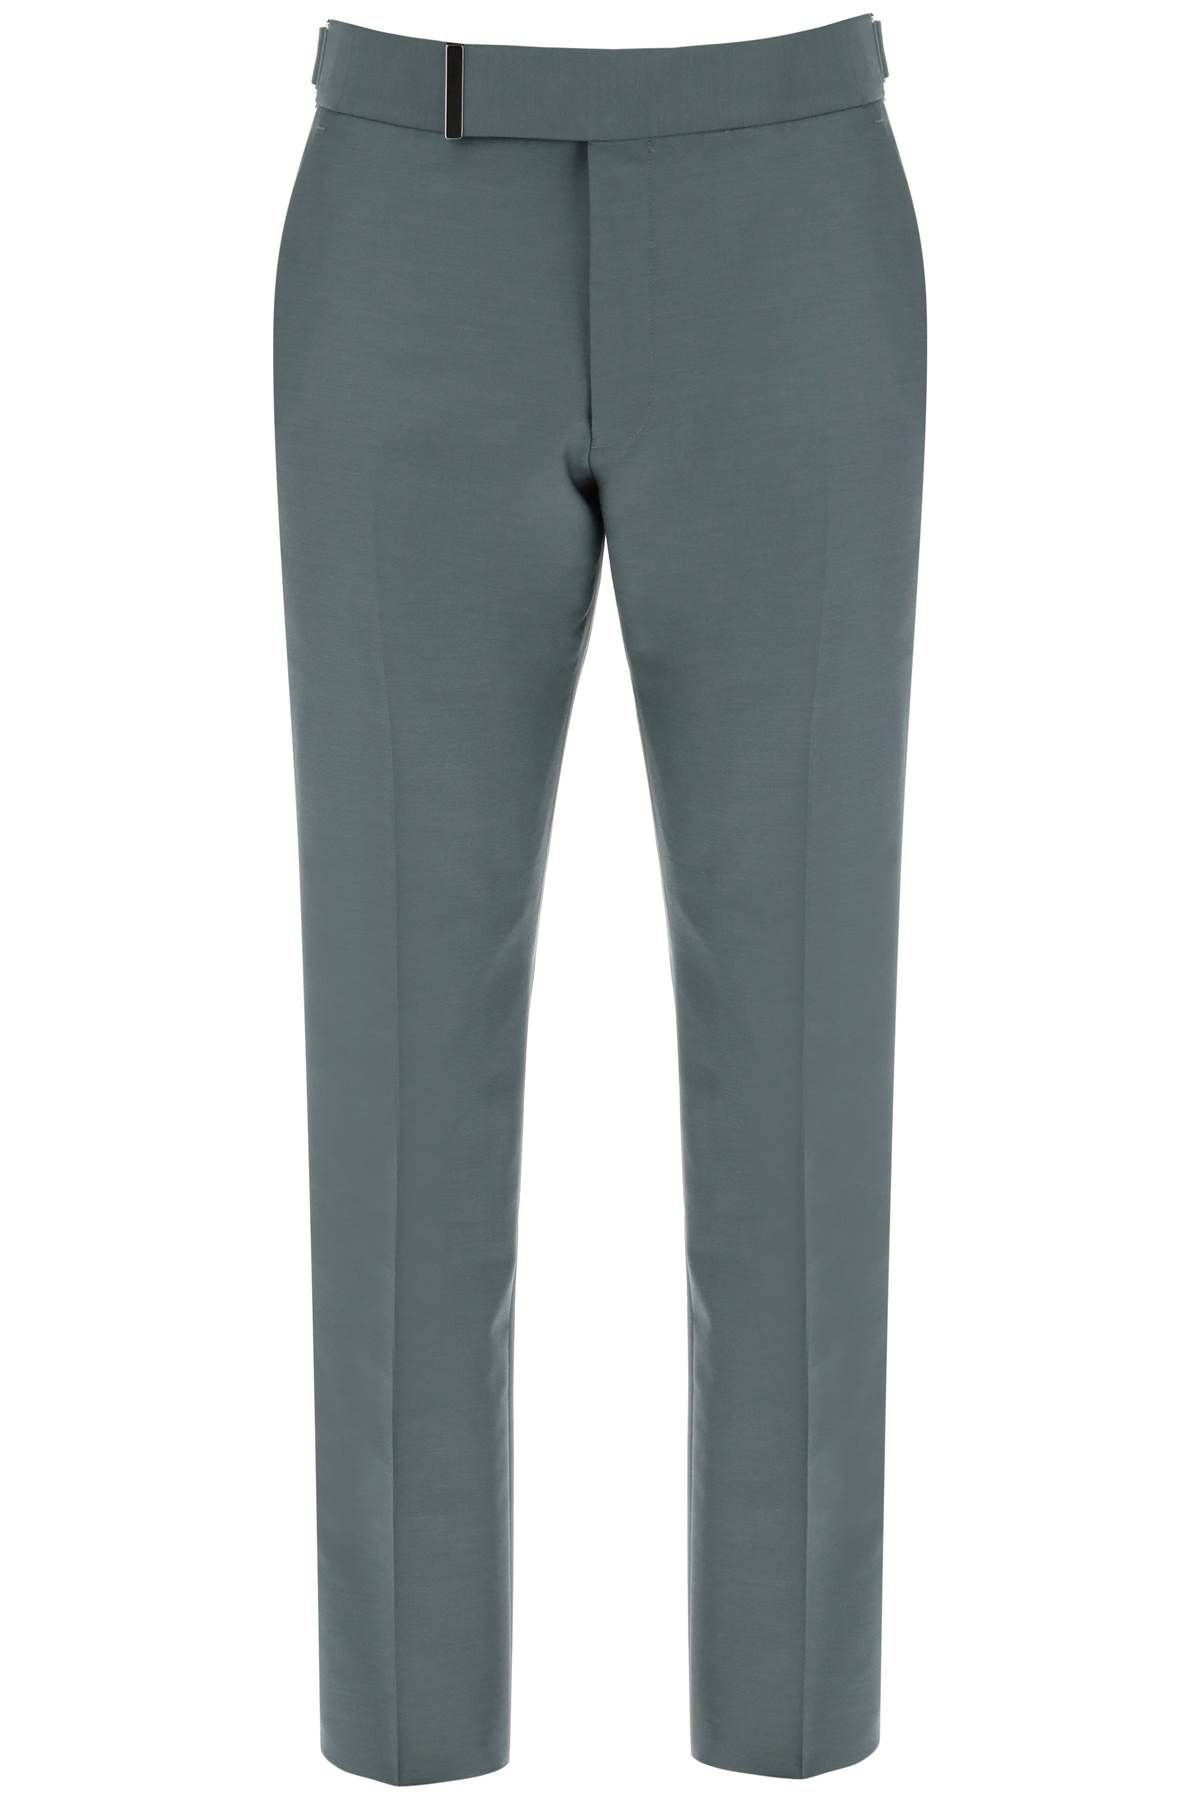 TOM FORD atticus tailored trousers in mikado